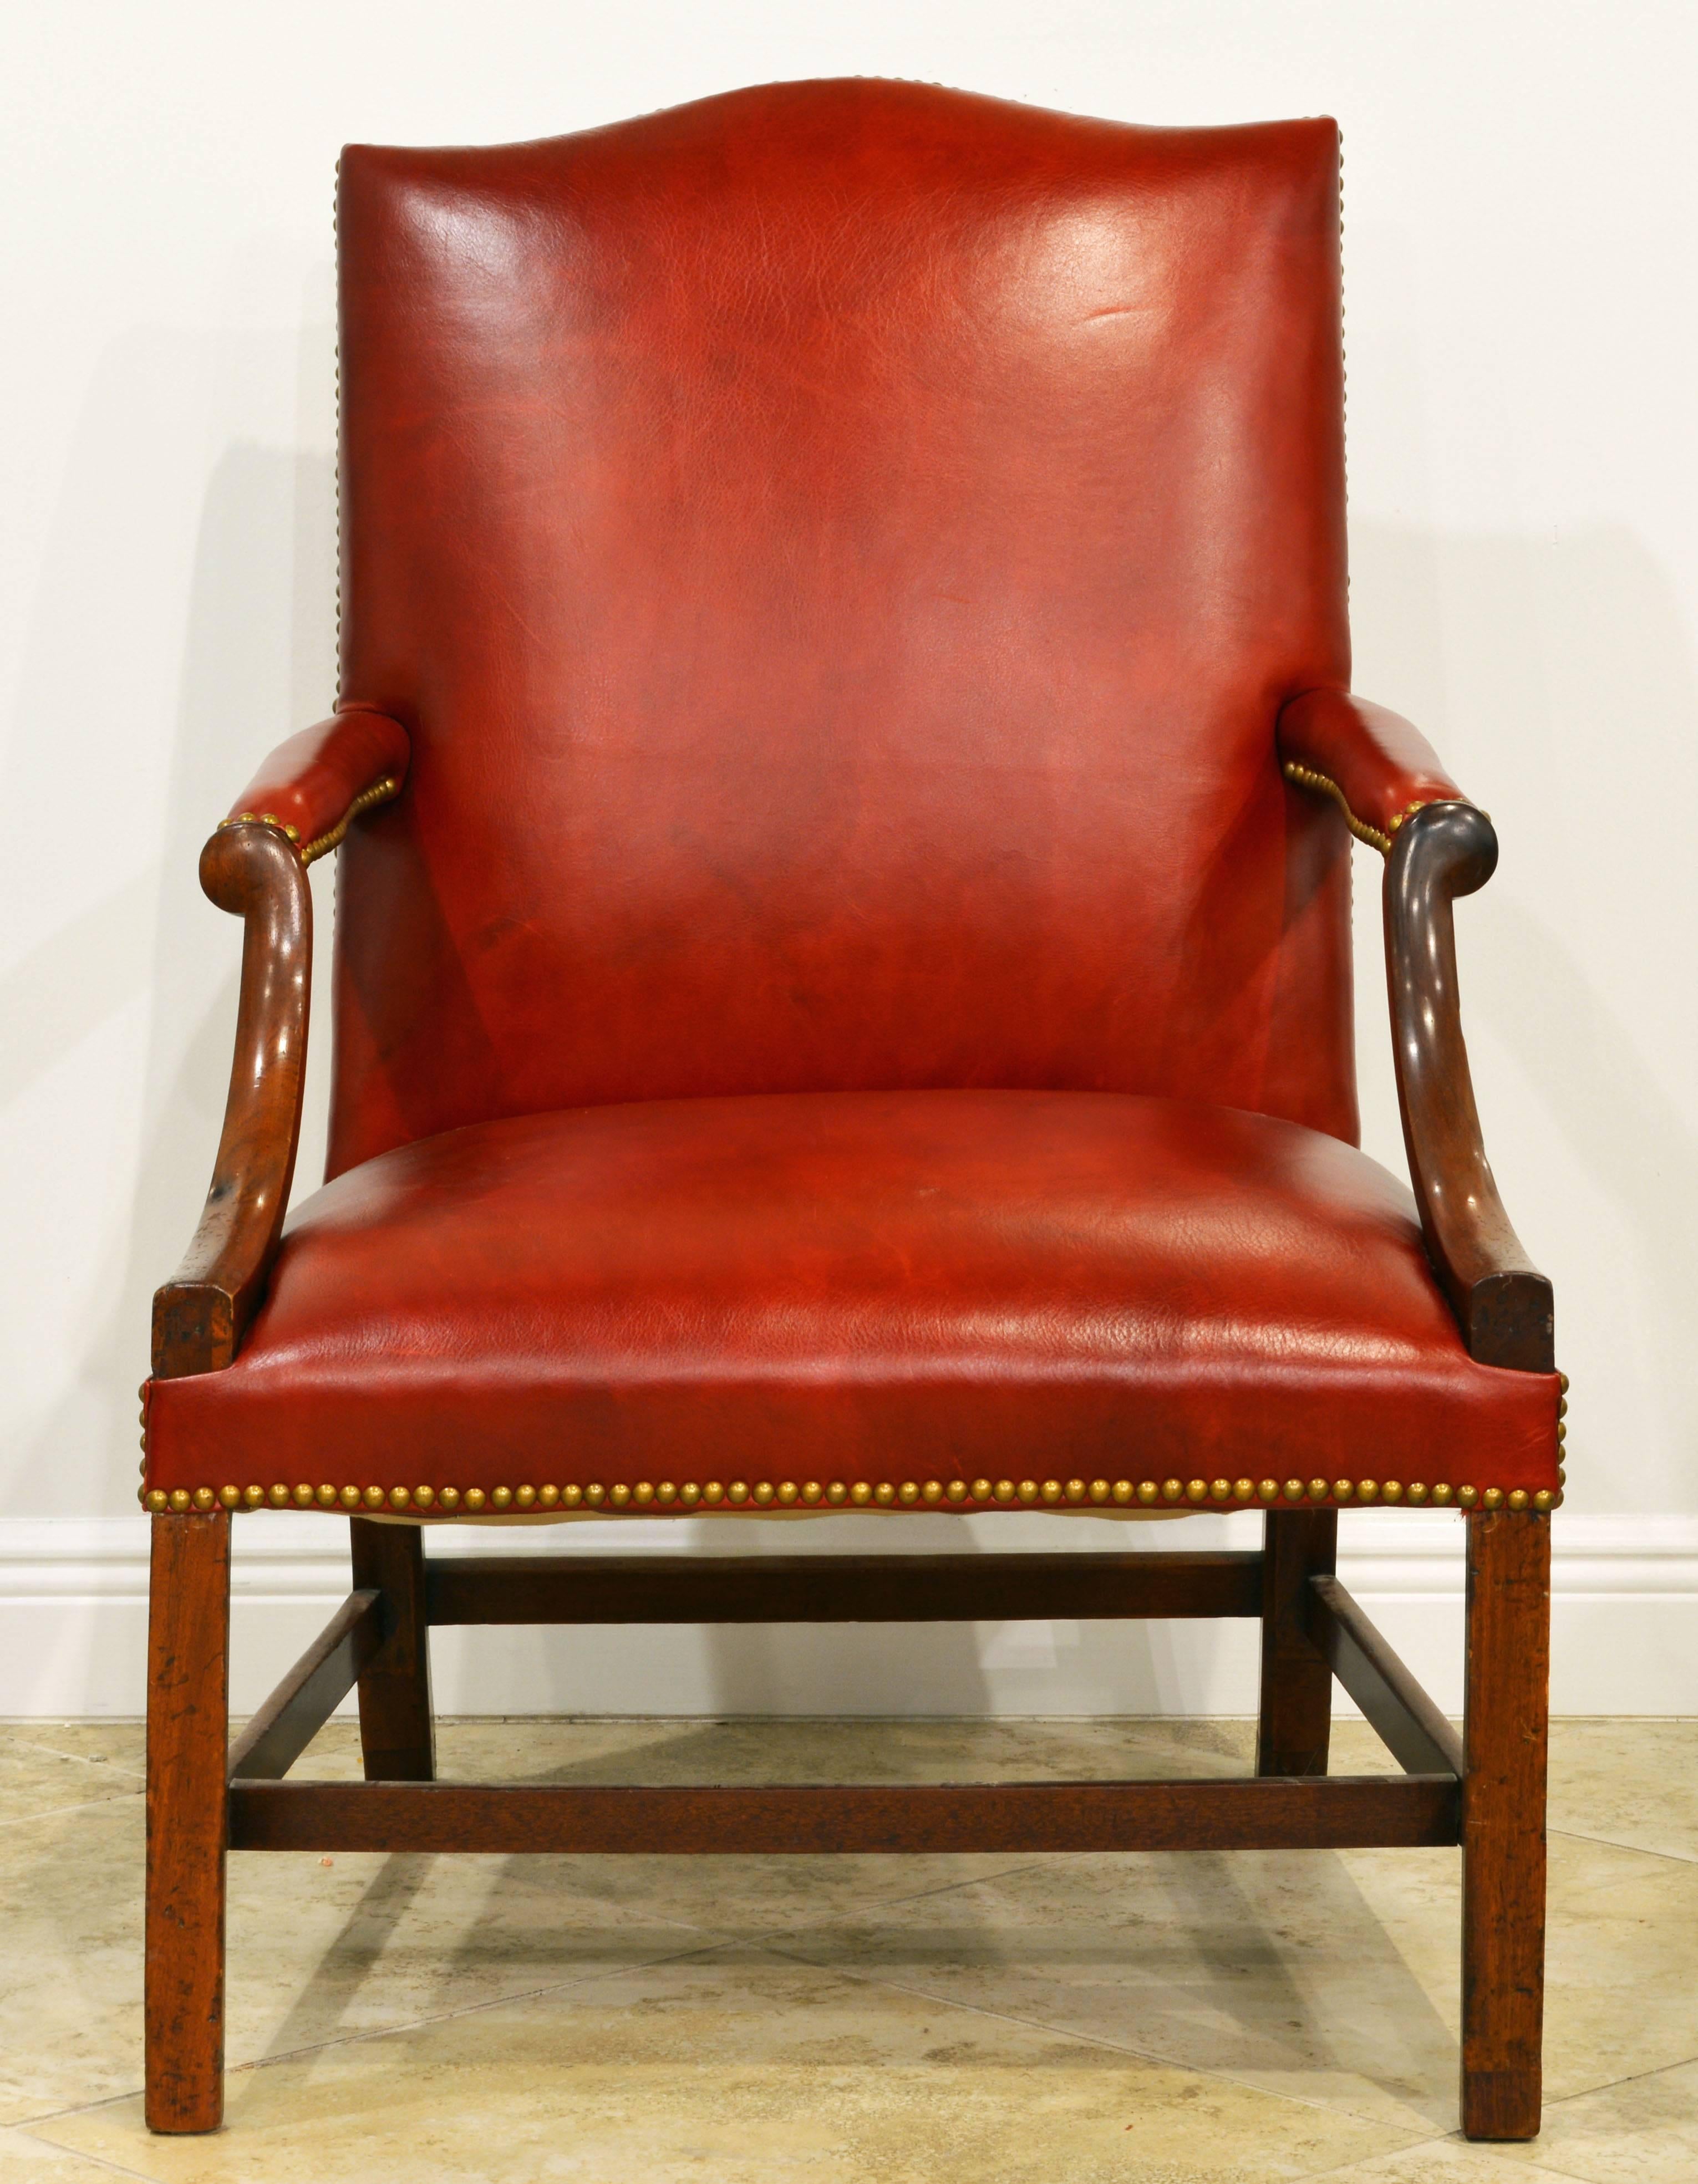 Newly recovered in high quality red leather this classic and comfortable English lolling chair makes a handsome impression very suitable for a library setting or a gentleman's corner.